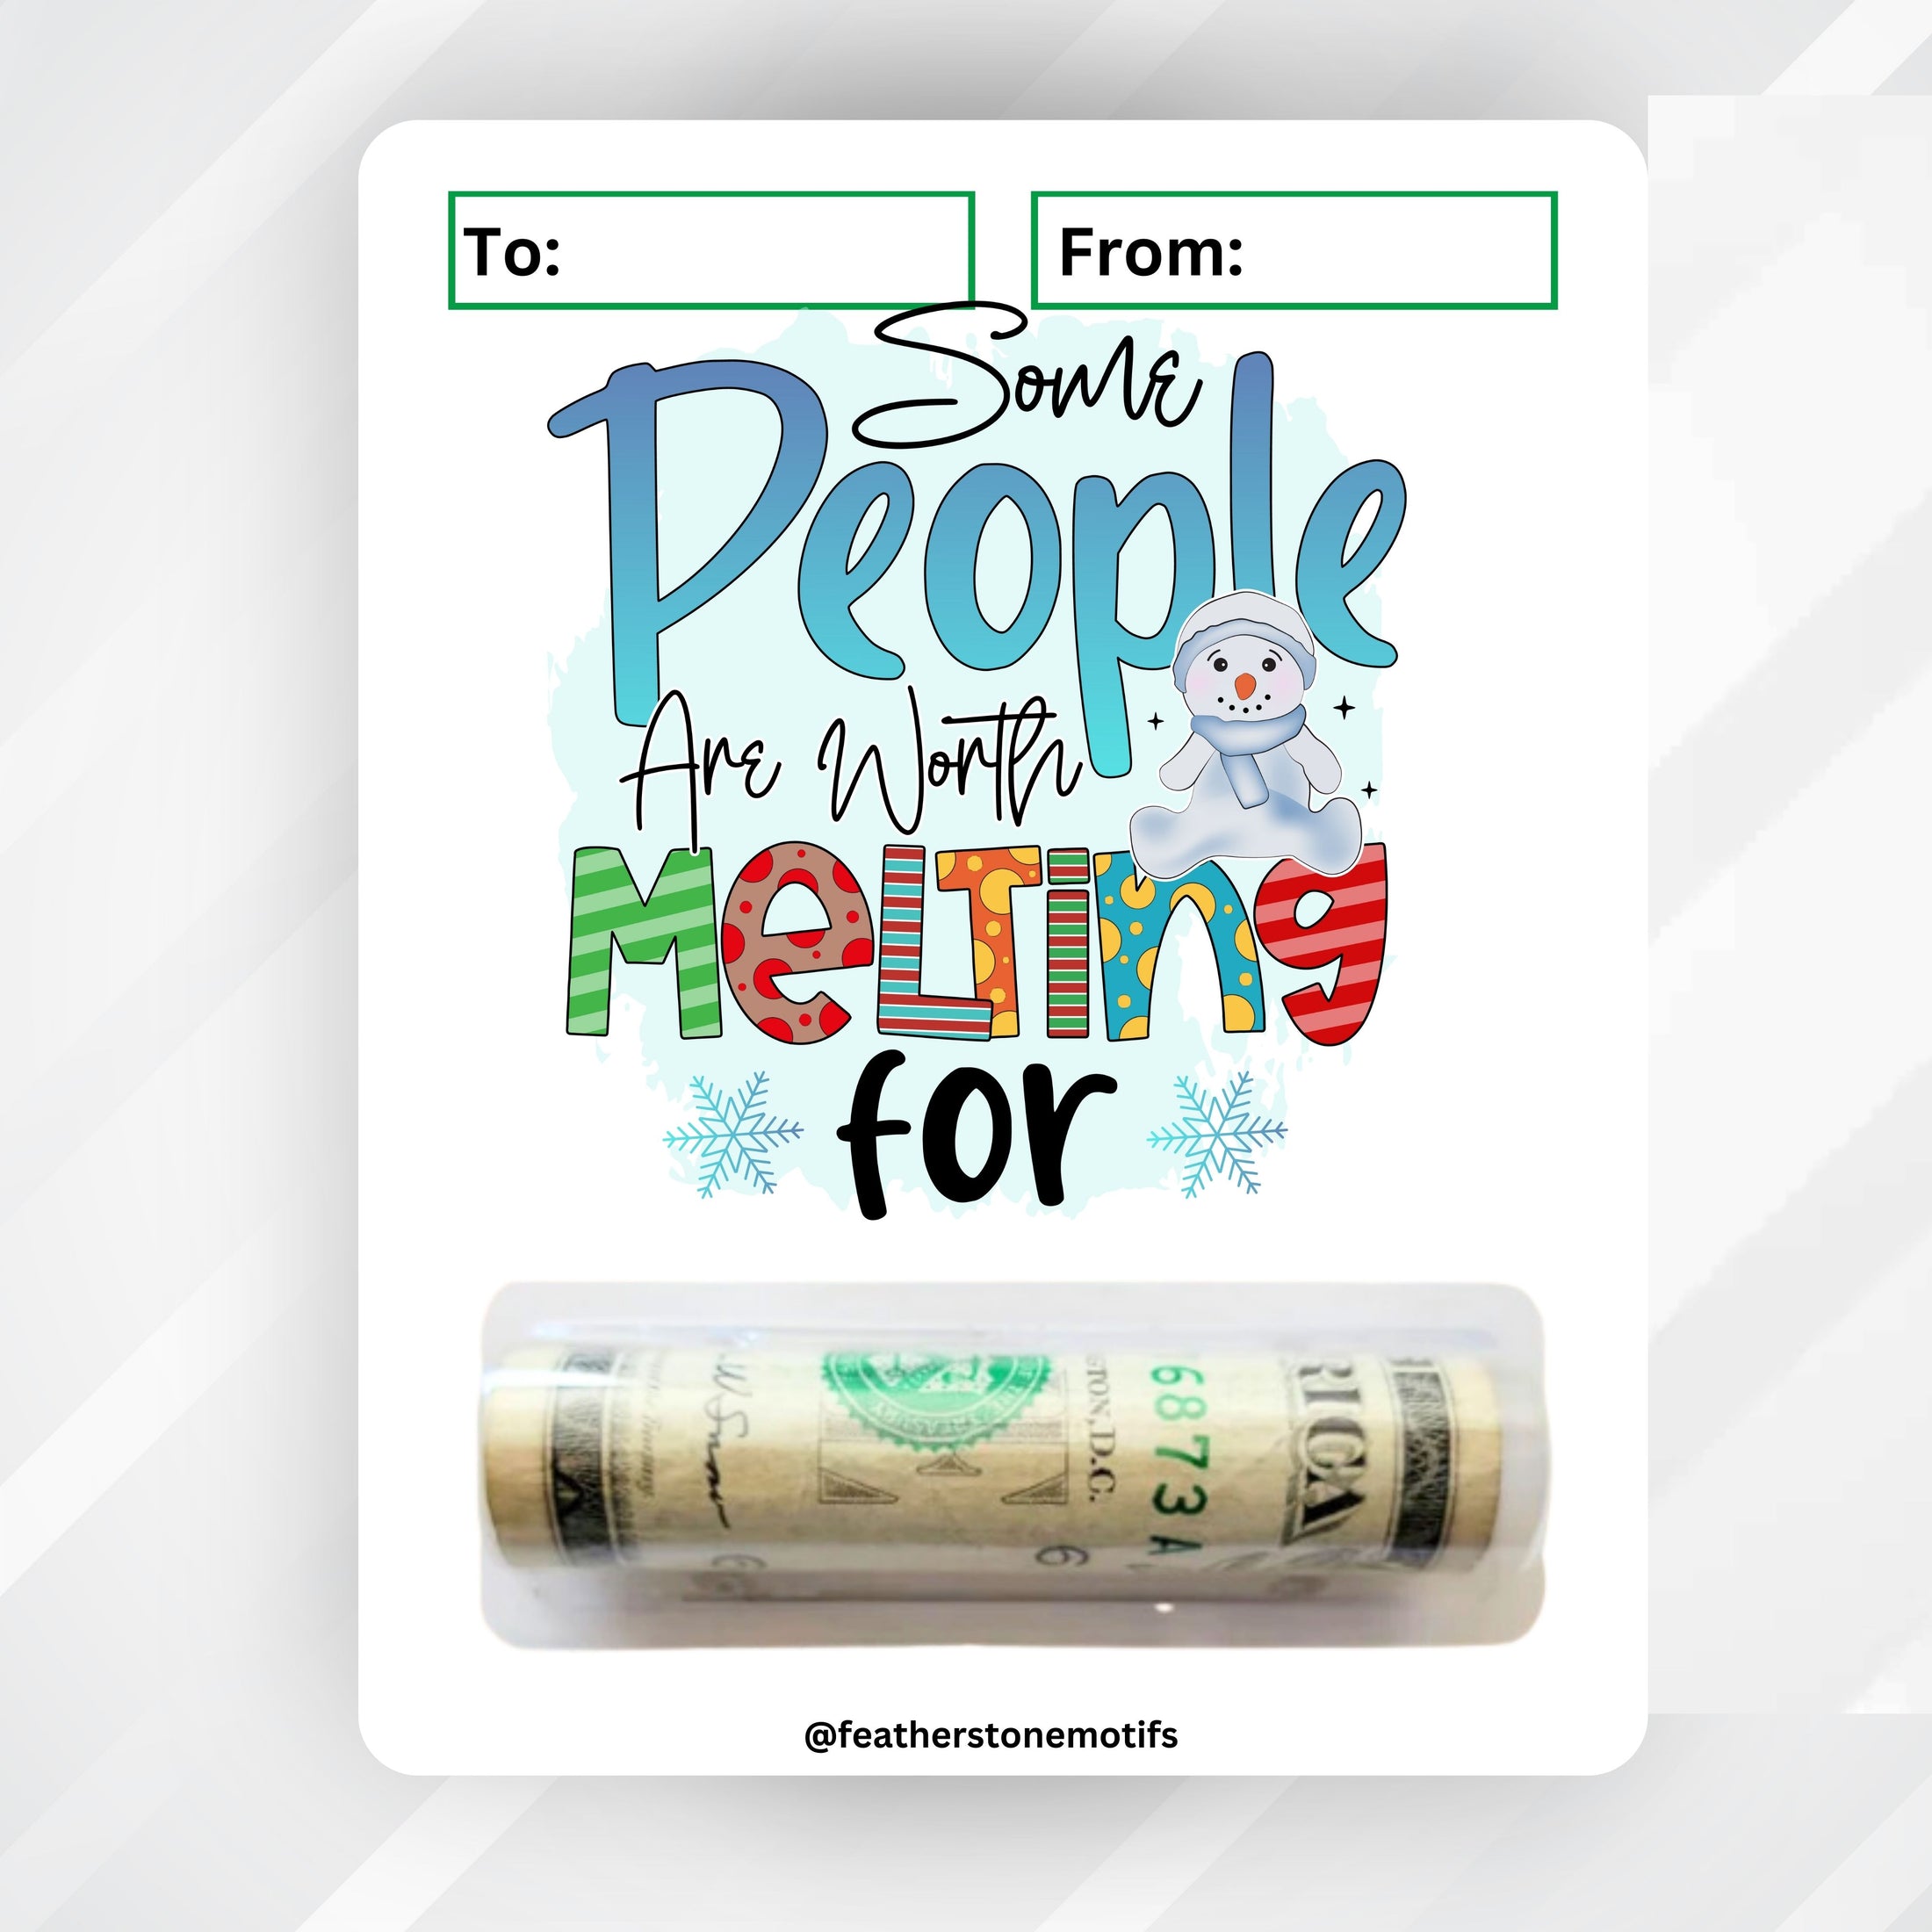 This image shows the money tube attached to the Worth Melting For Money Card.